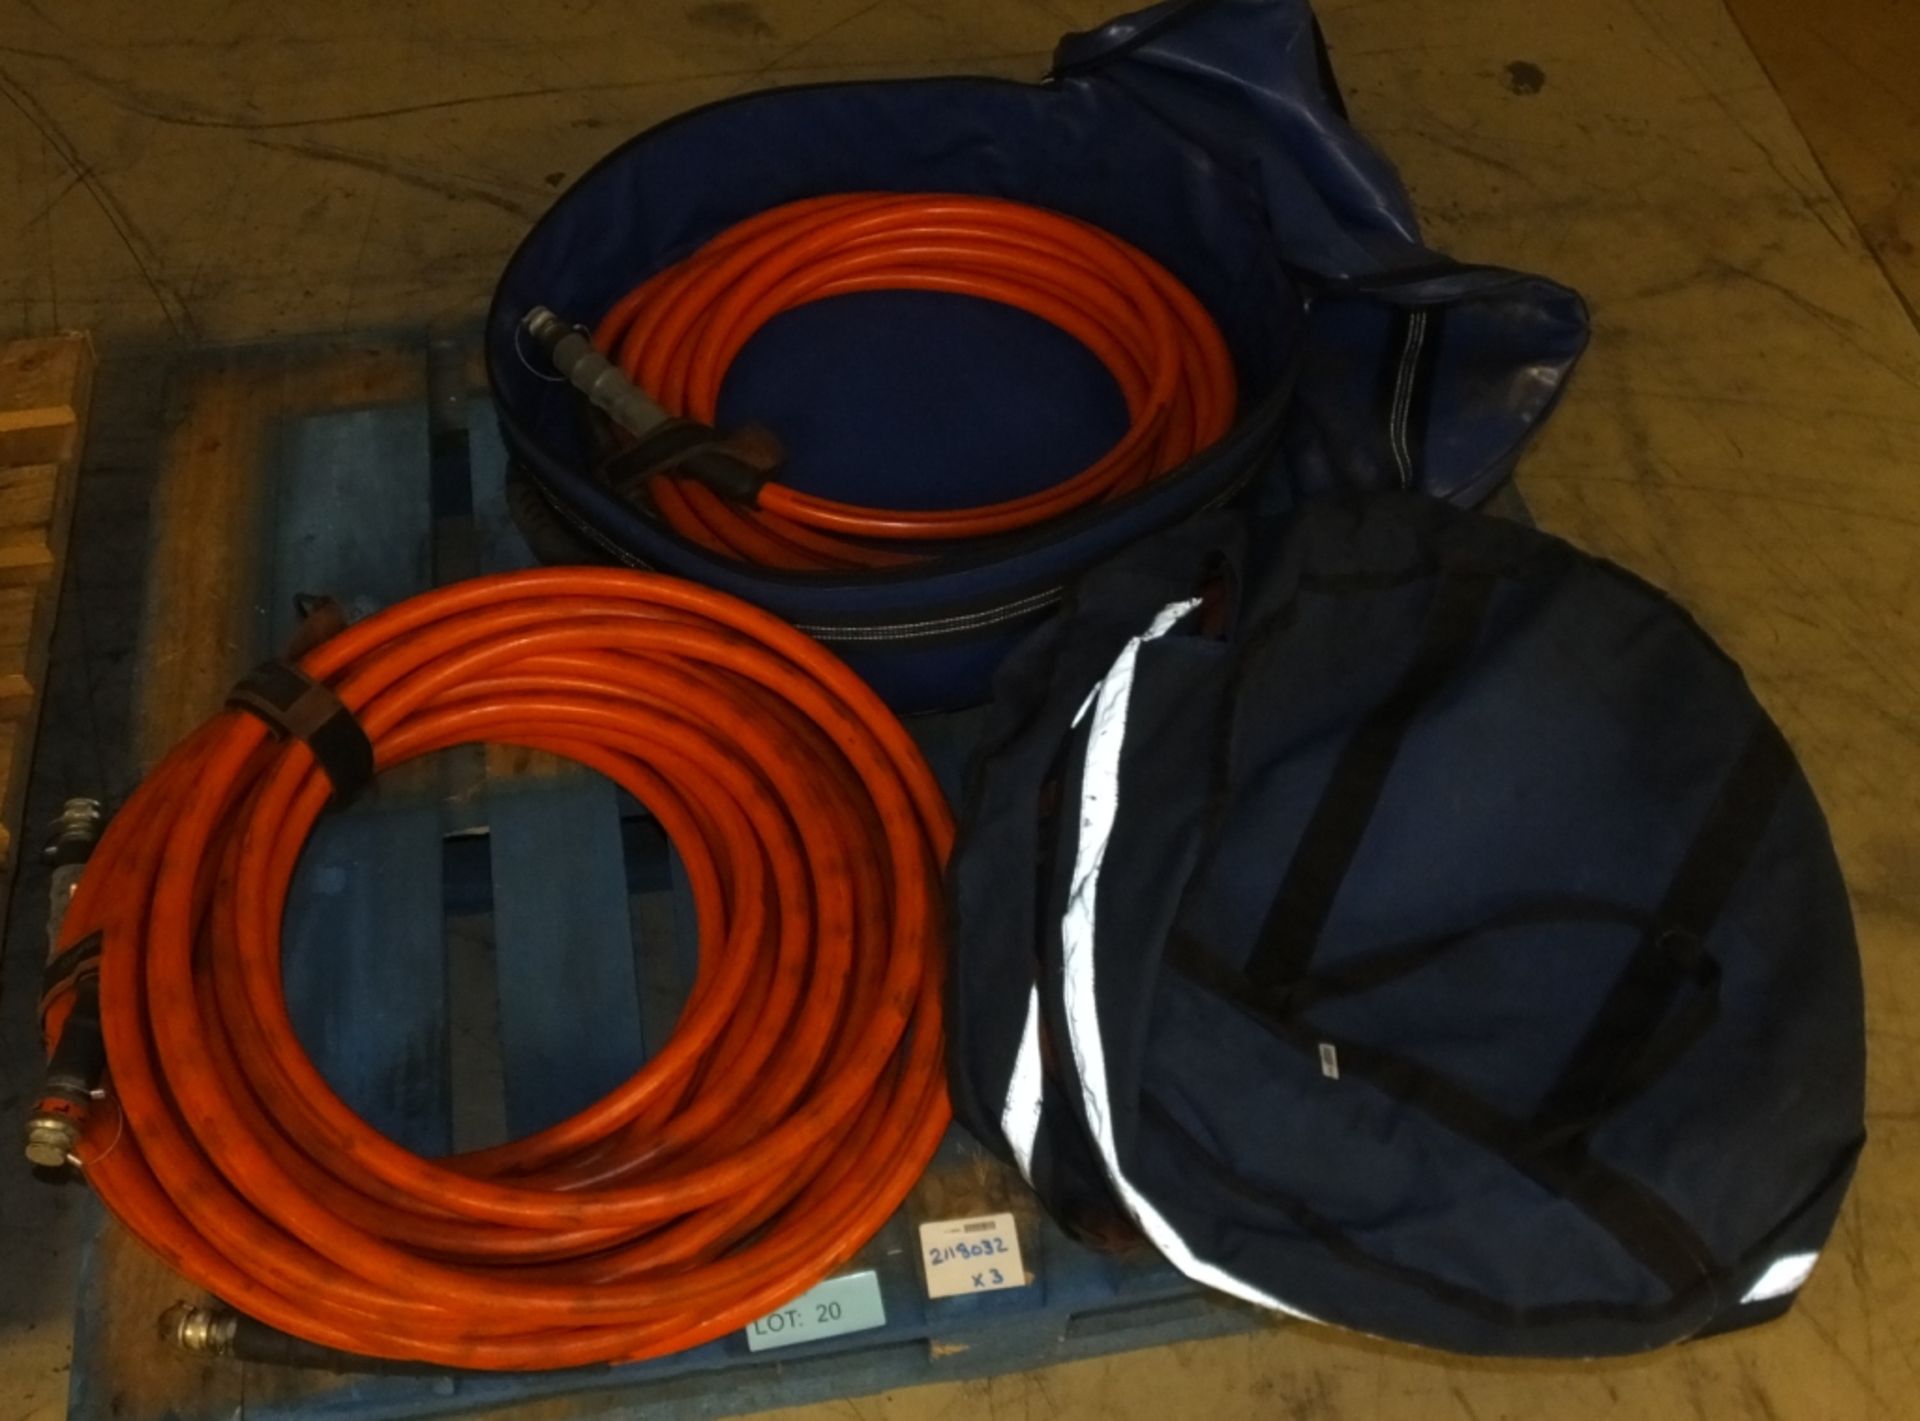 3x Holmatro Hydraulic Hoses in carry bags